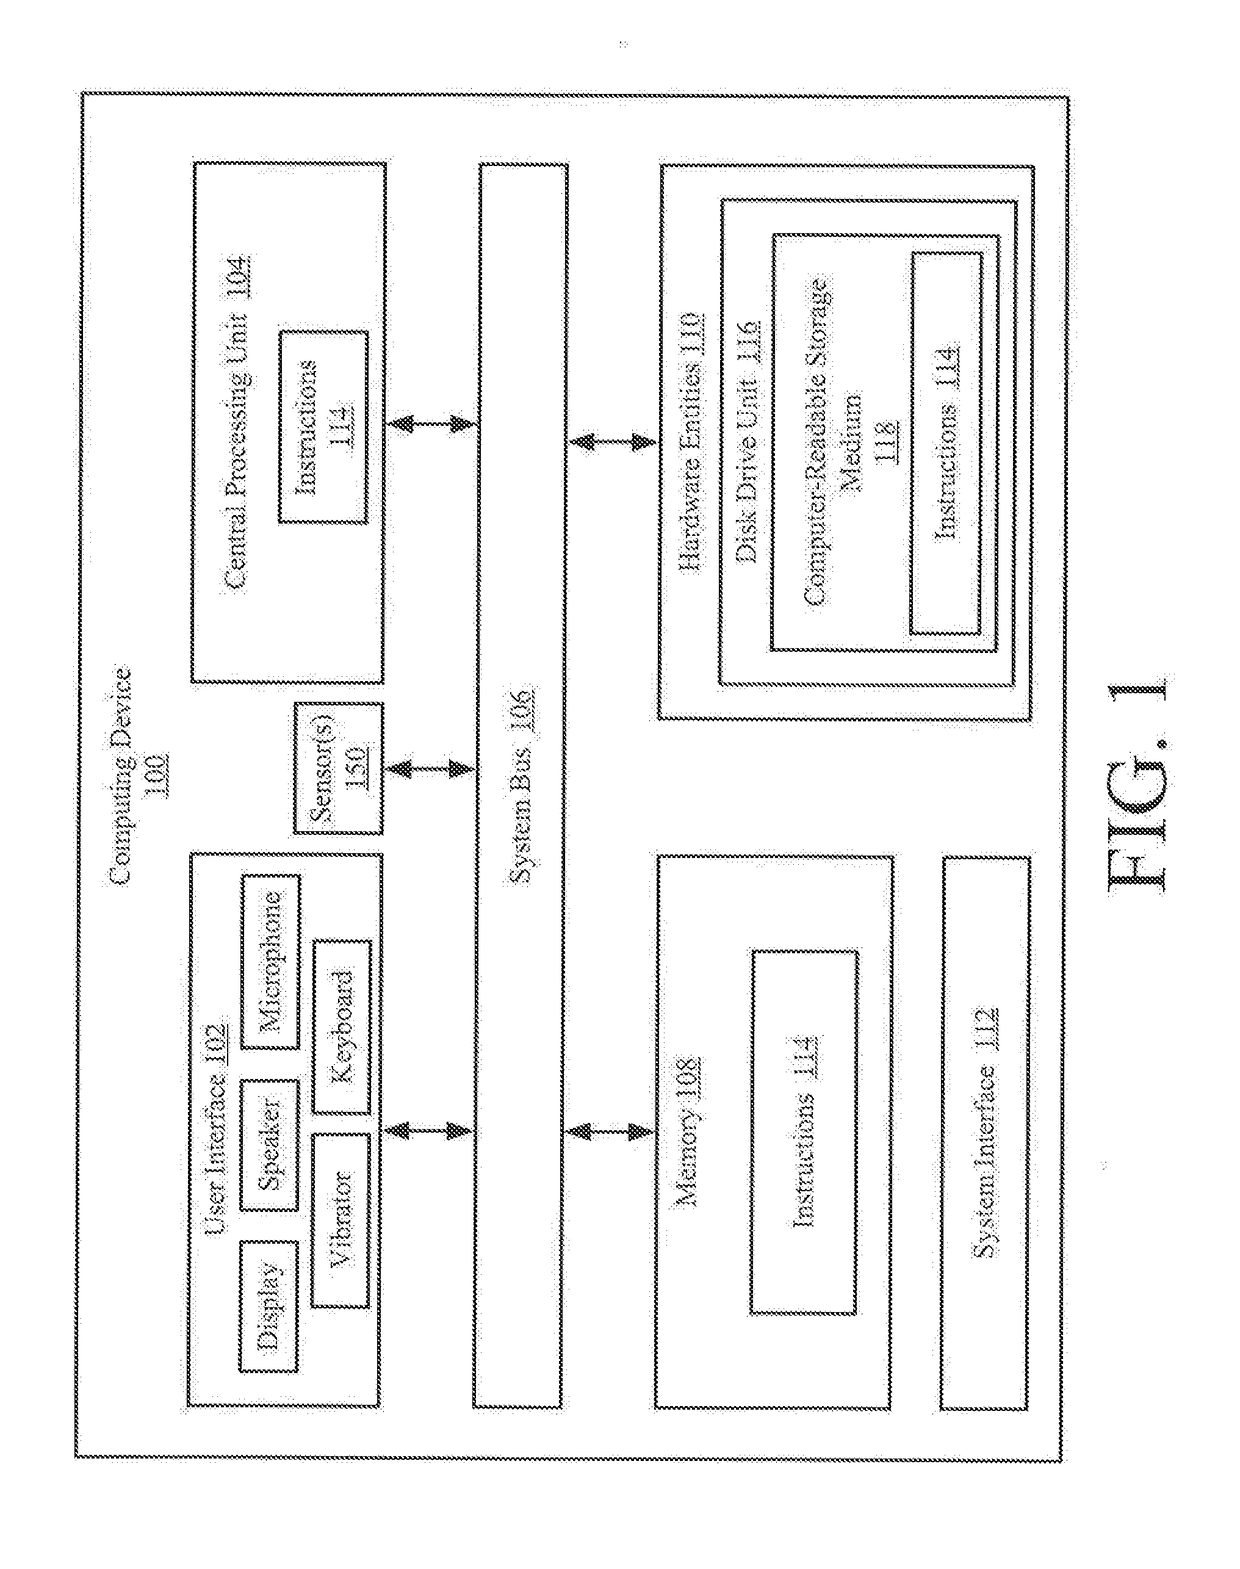 Systems and methods for the diagnosis and treatment of neurological disorders